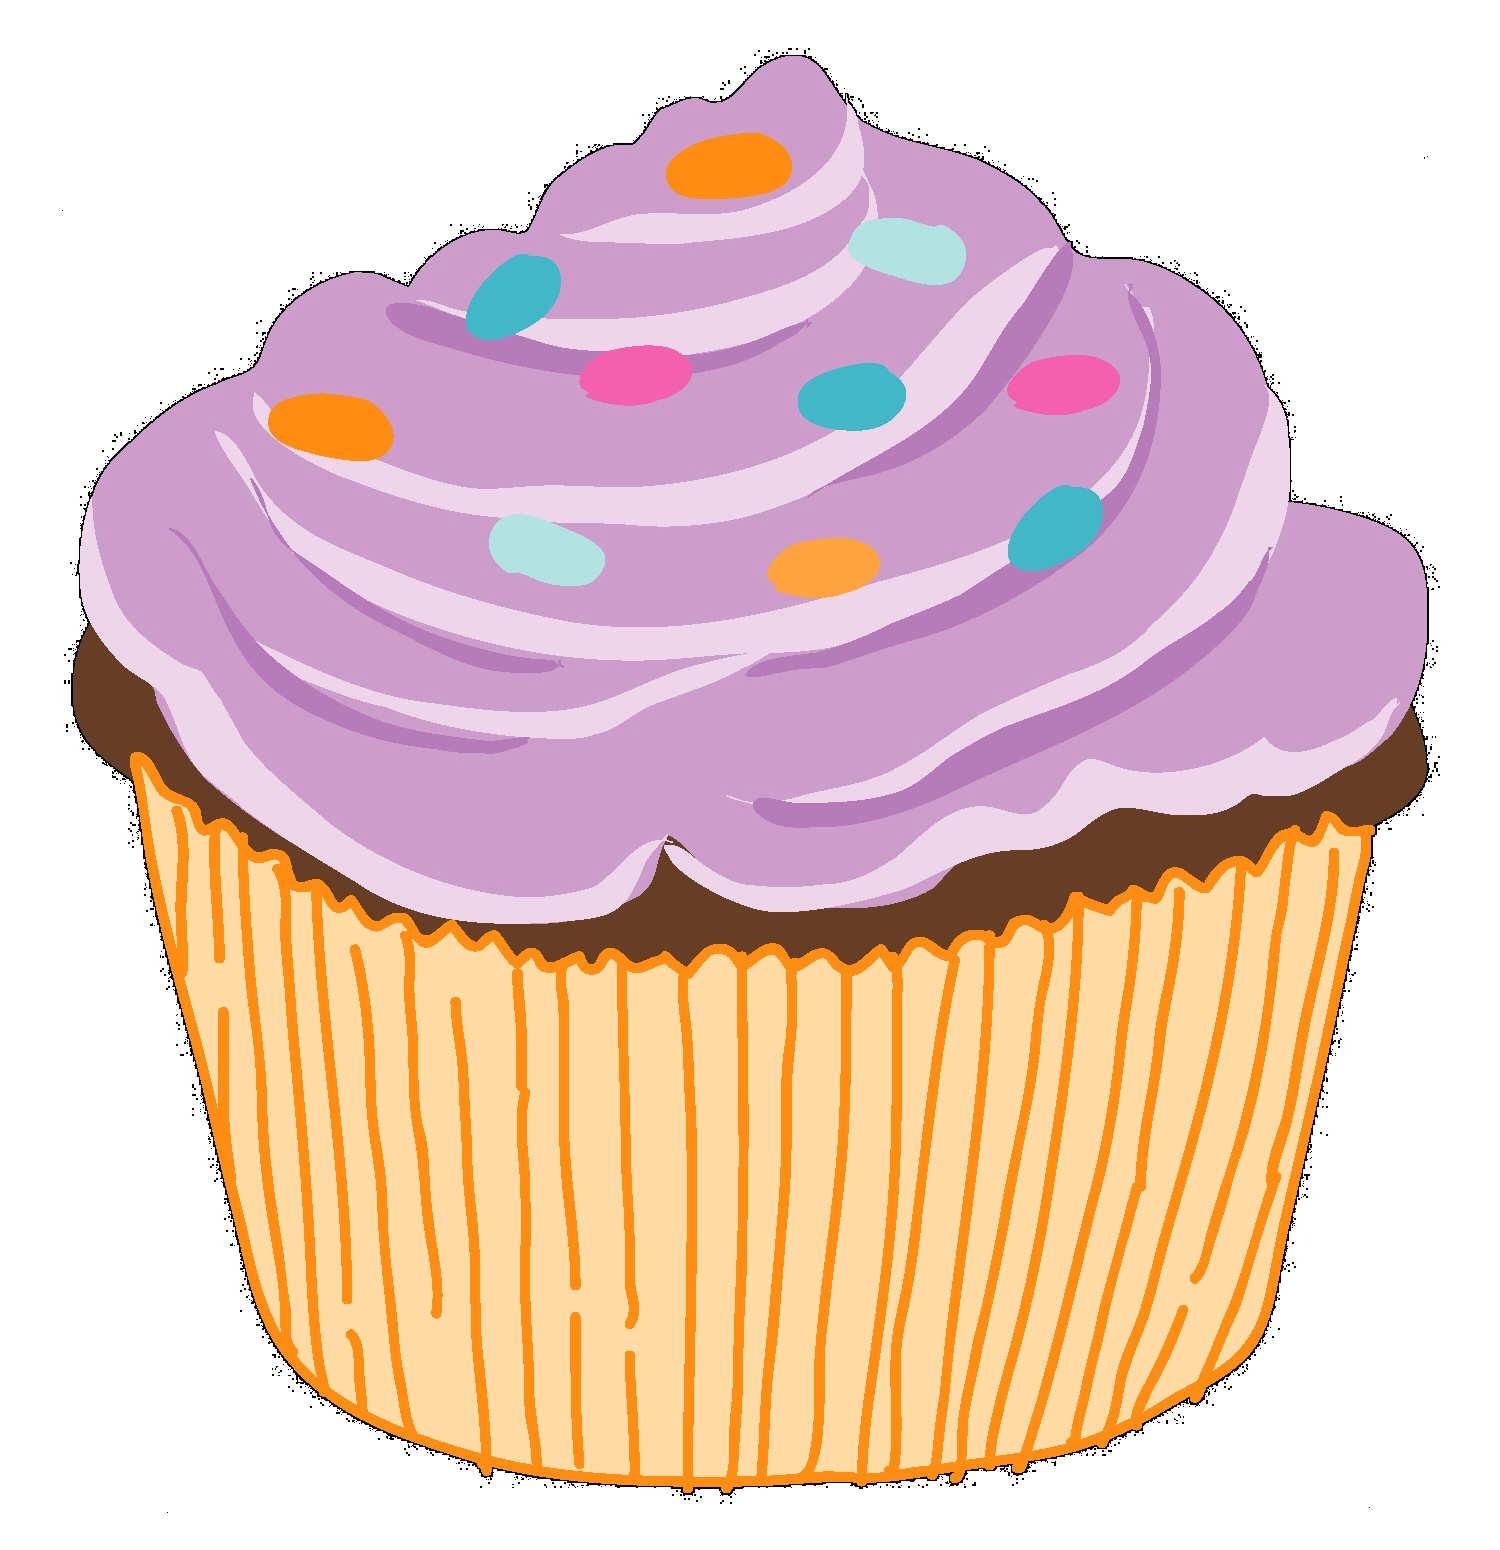 Cupcake clipart free download free clipart images 2